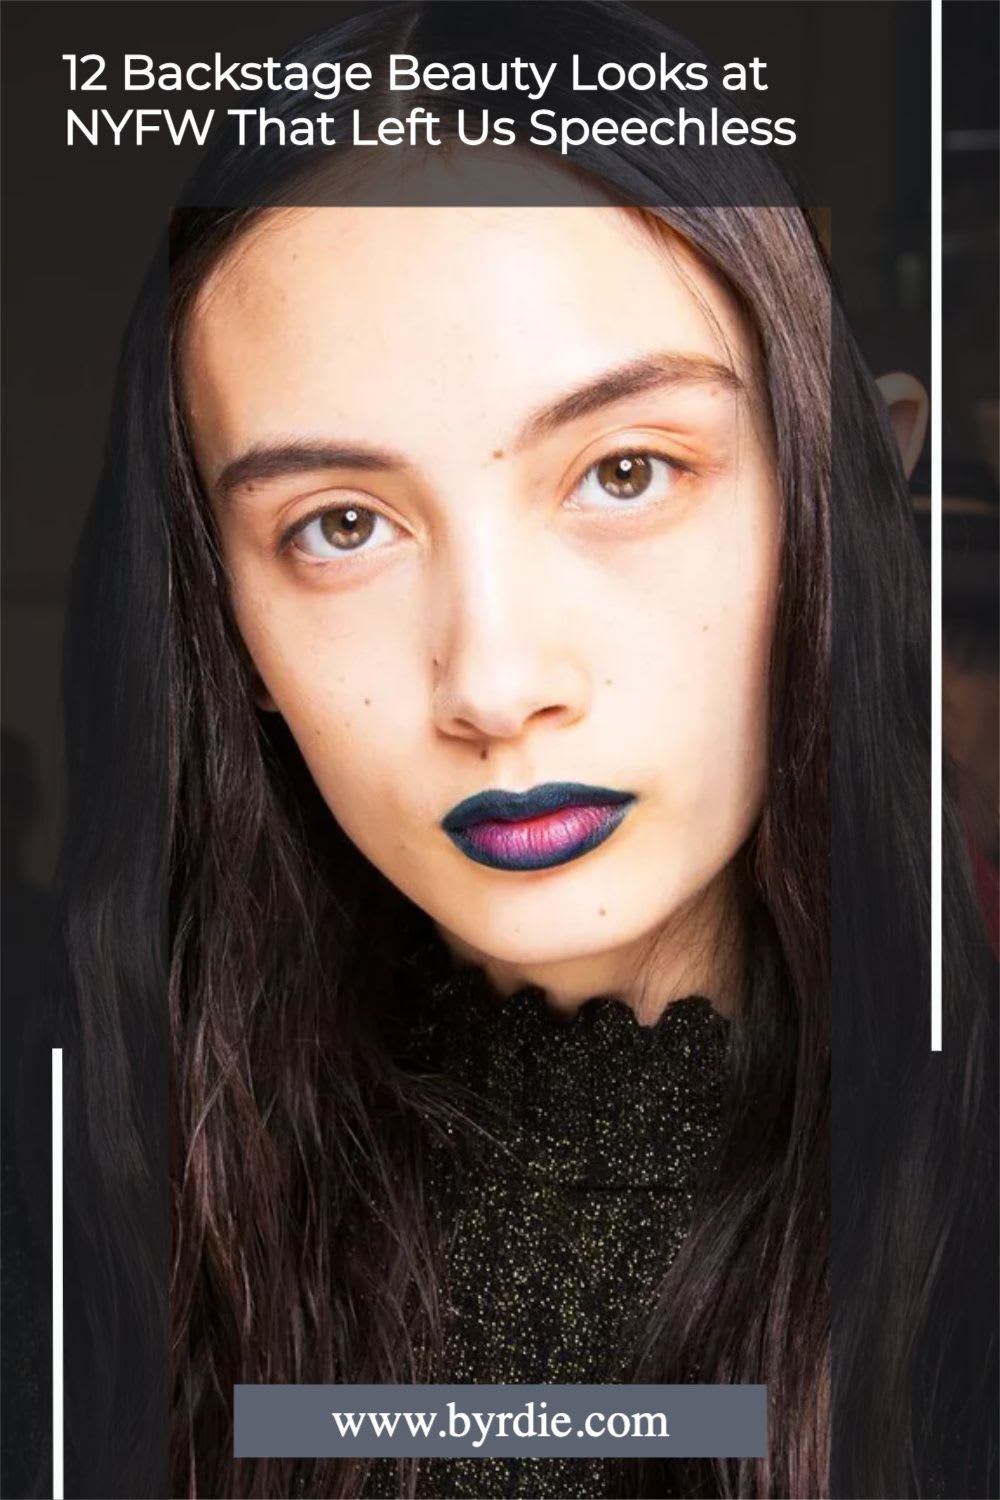 12 Backstage Beauty Looks at NYFW That Left Us Speechless